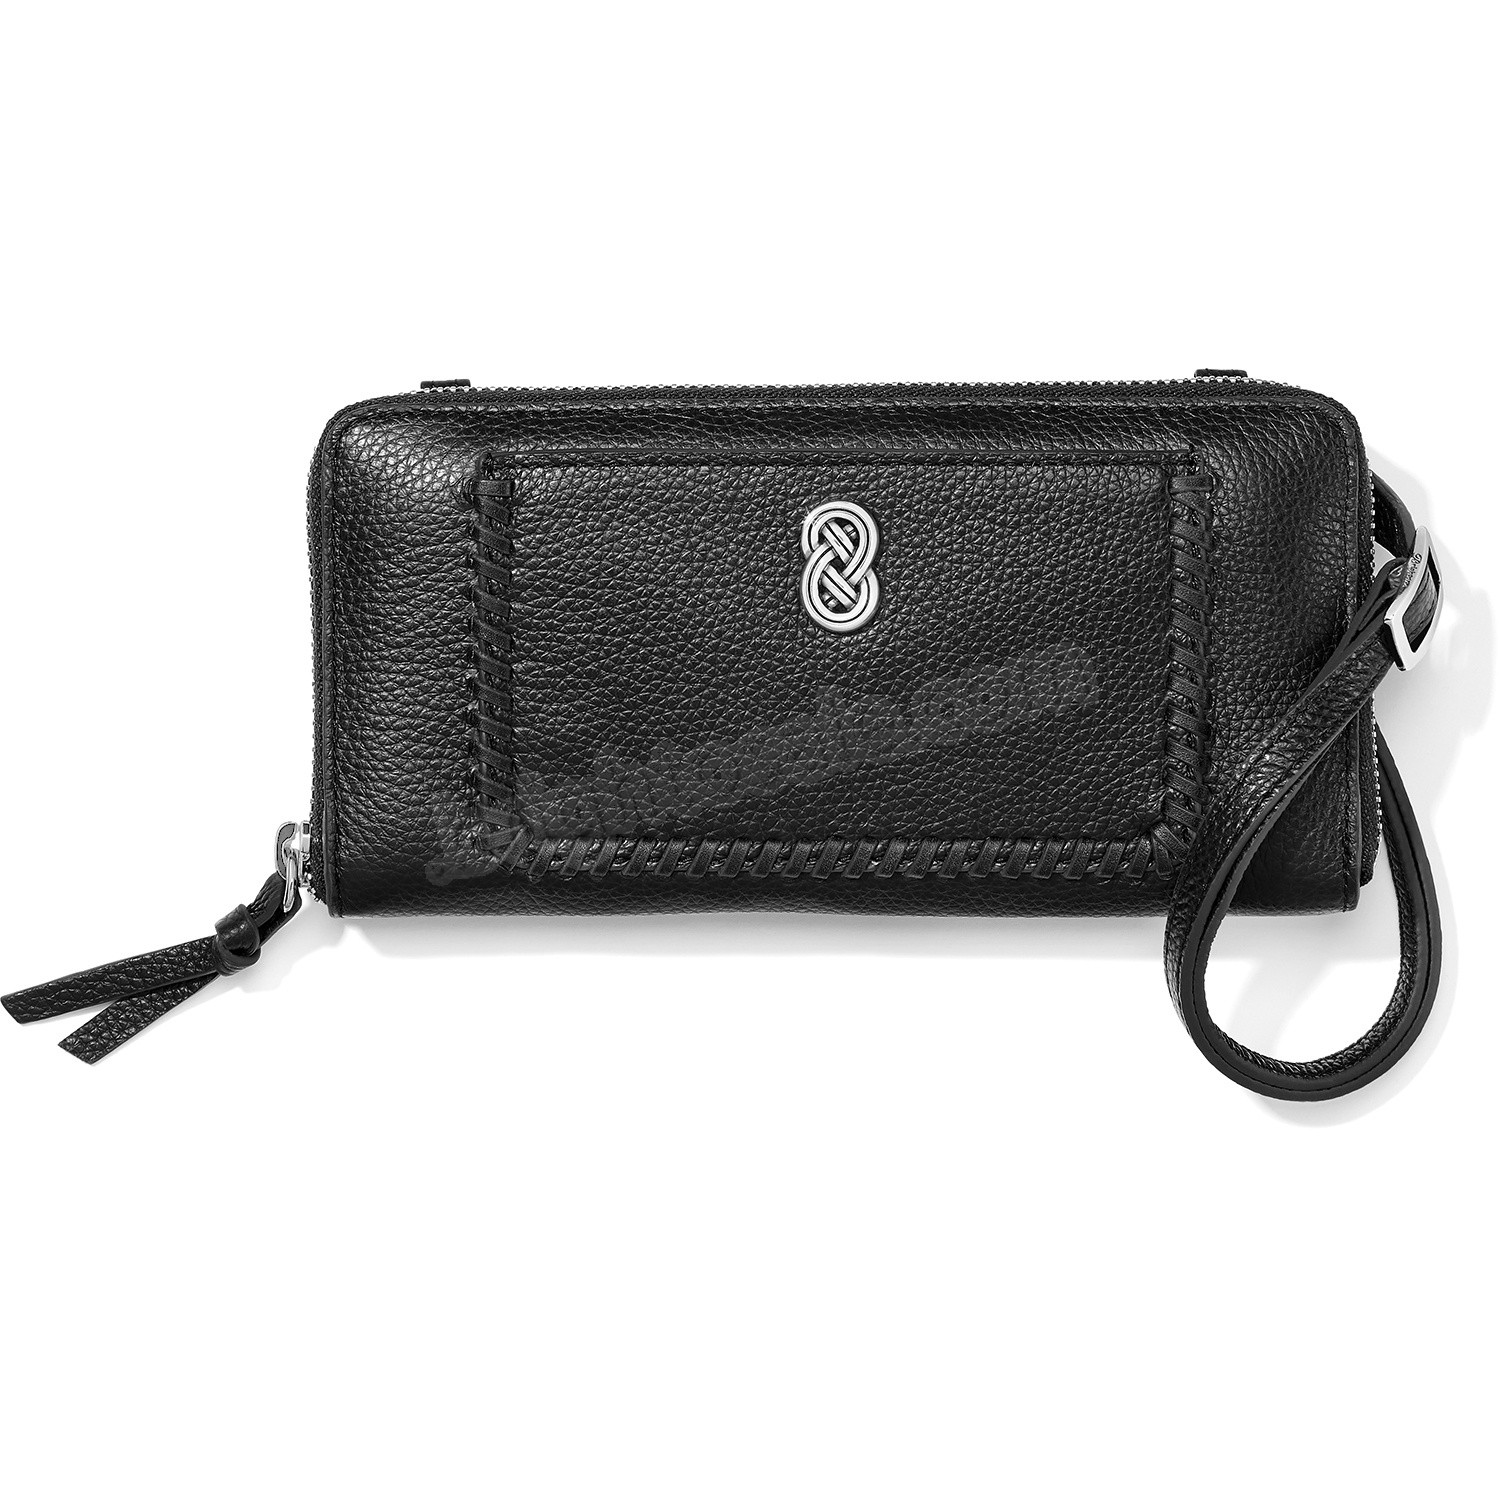 Brighton Collectibles & Online Discount Ferrara Sauvage Large Hair-On Cross Body Pouch - Brighton Collectibles & Online Discount Ferrara Sauvage Large Hair-On Cross Body Pouch